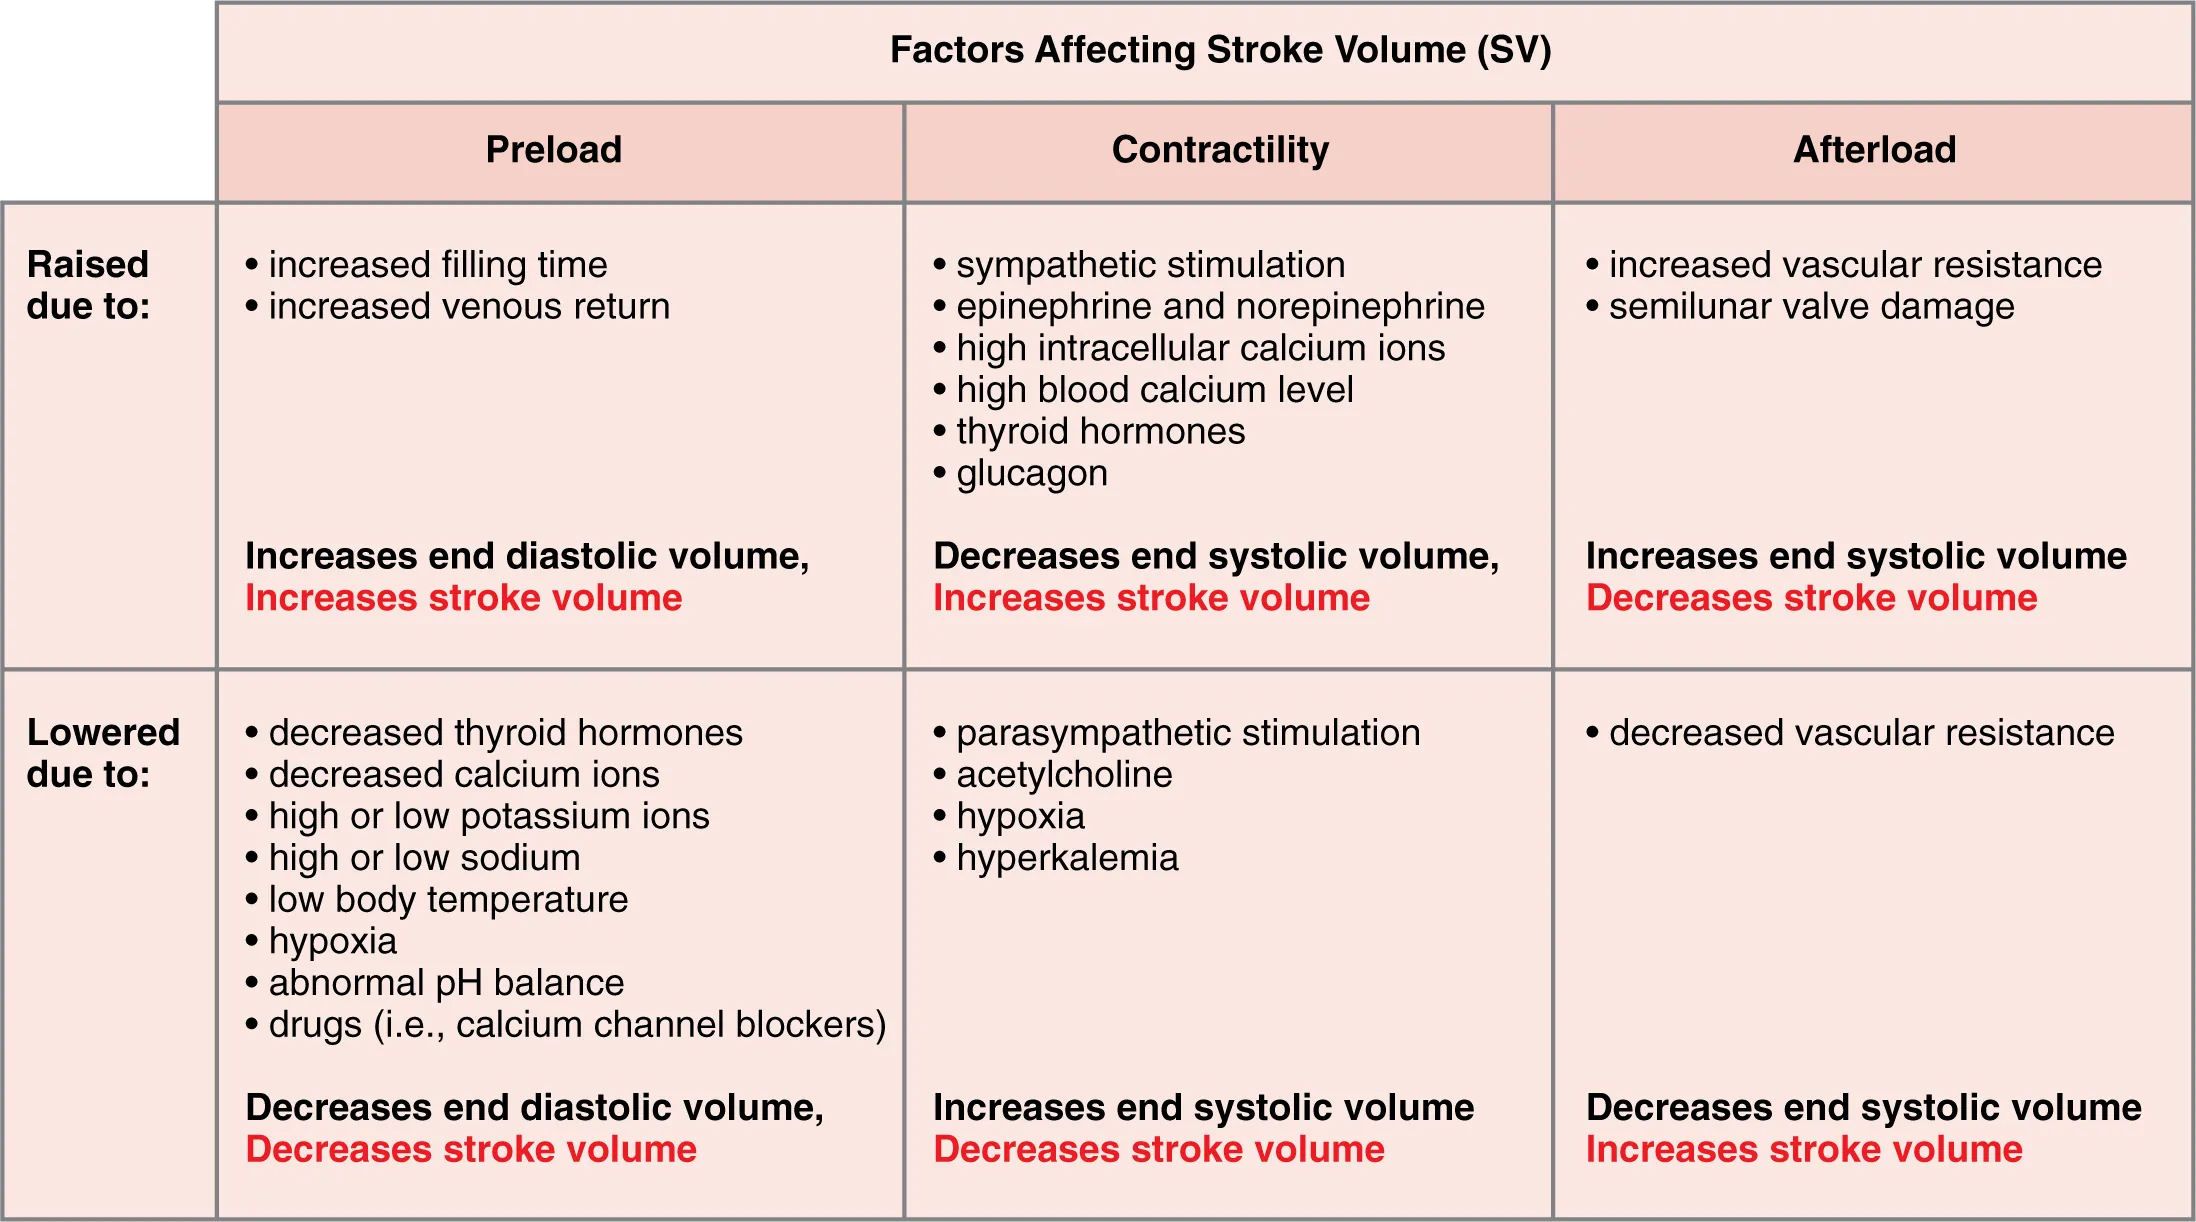 This table describes major factors influencing stroke volume. Preload may be raised due to longer filling time or increased venous return. These factors increase end diastolic volume and increase stroke volume. Preload may be lowered due to decreased thyroid hormones, decreased calcium ions, high or low potassium ions, high or low sodium, low body temperature, hypoxia, abnormal pH balance, or drugs (for example, calcium channel blockers). These factors decrease end diastolic volume and decrease stroke volume. Contractility may be raised due to sympathetic stimulation, epinephrine and norepinephrine, high intracellular calcium ions, high blood calcium level, thyroid hormones, or glucagon. These factors decrease end systolic volume and increase stroke volume. Contractility may be lowered due to parasympathetic stimulation, acetylcholine, hypoxia, or hyperkalemia. These factors increase end systolic volume and decrease stroke volume. Afterload may be raised due to increased vascular resistance or semilunar valve damage. These factors increase end systolic volume and decrease stroke volume. Afterload may be lowered due to decreased vascular resistance. This factor decreases end systolic volume and increases stroke volume.